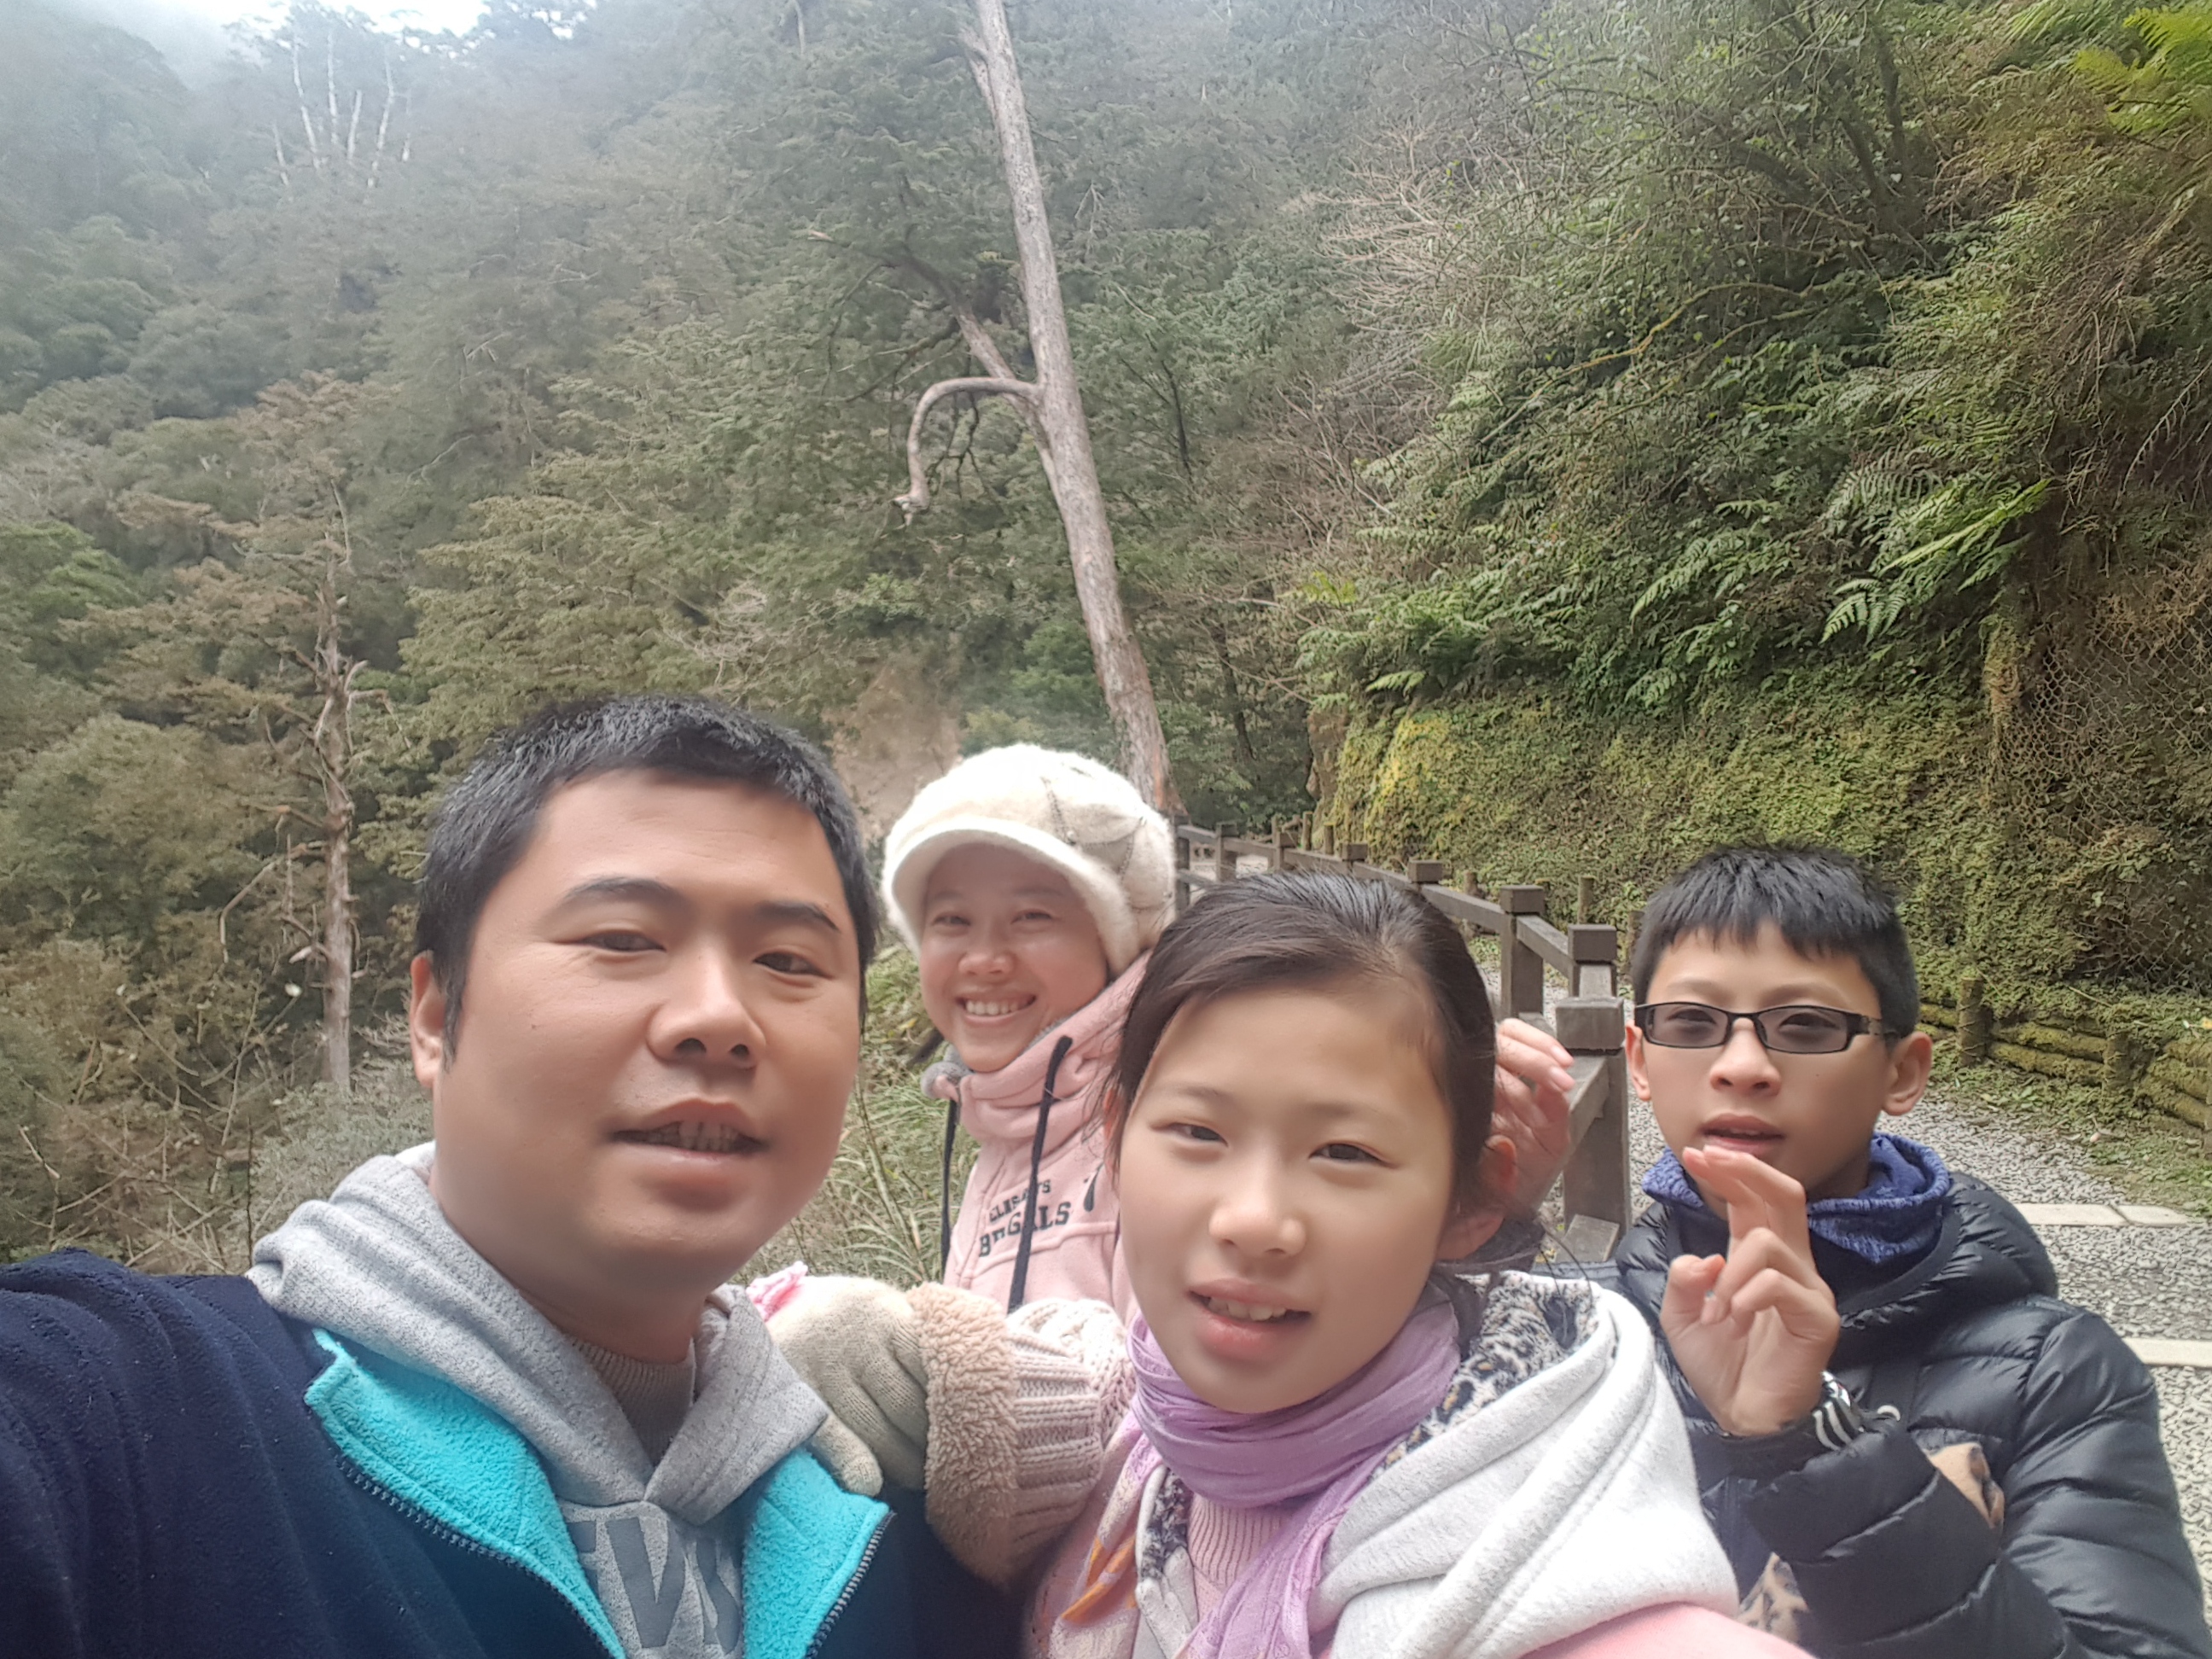 Chin Na-Li (second from left) travels with her family. (Photo/Provided by Chin Na-Li)